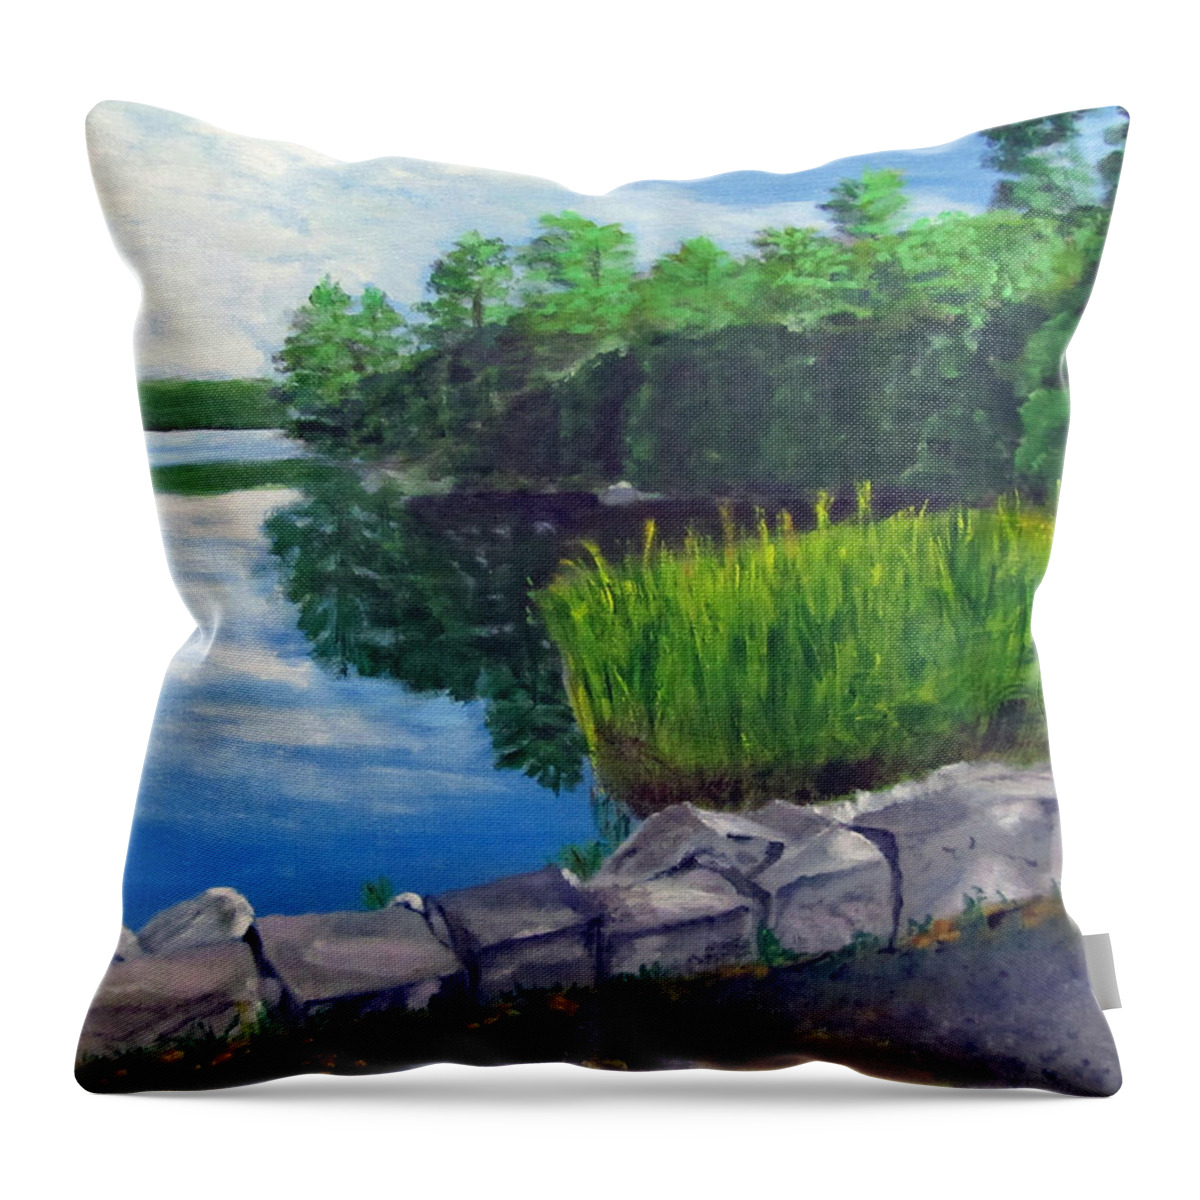 Landscape Throw Pillow featuring the painting Tower Hill Pond by Linda Feinberg